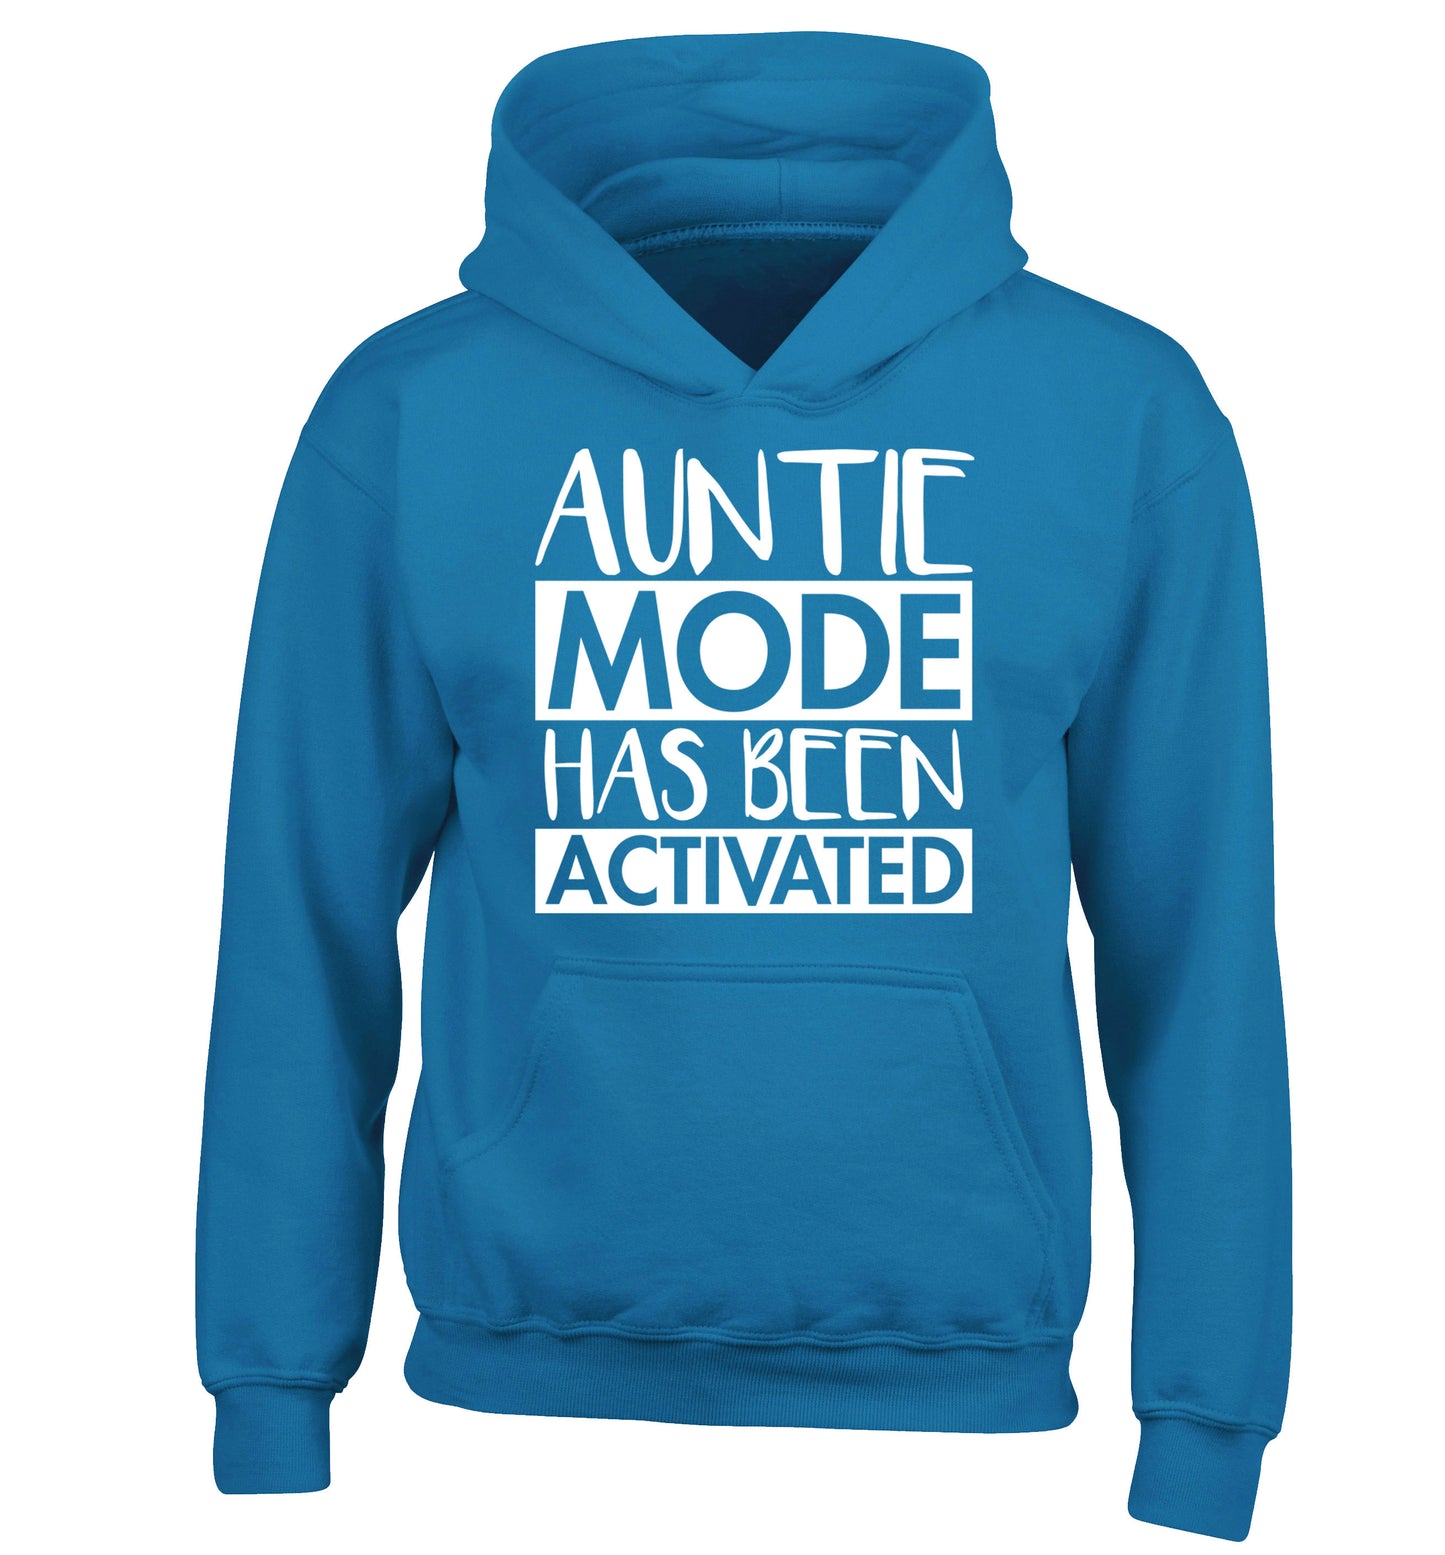 Auntie mode activated children's blue hoodie 12-14 Years